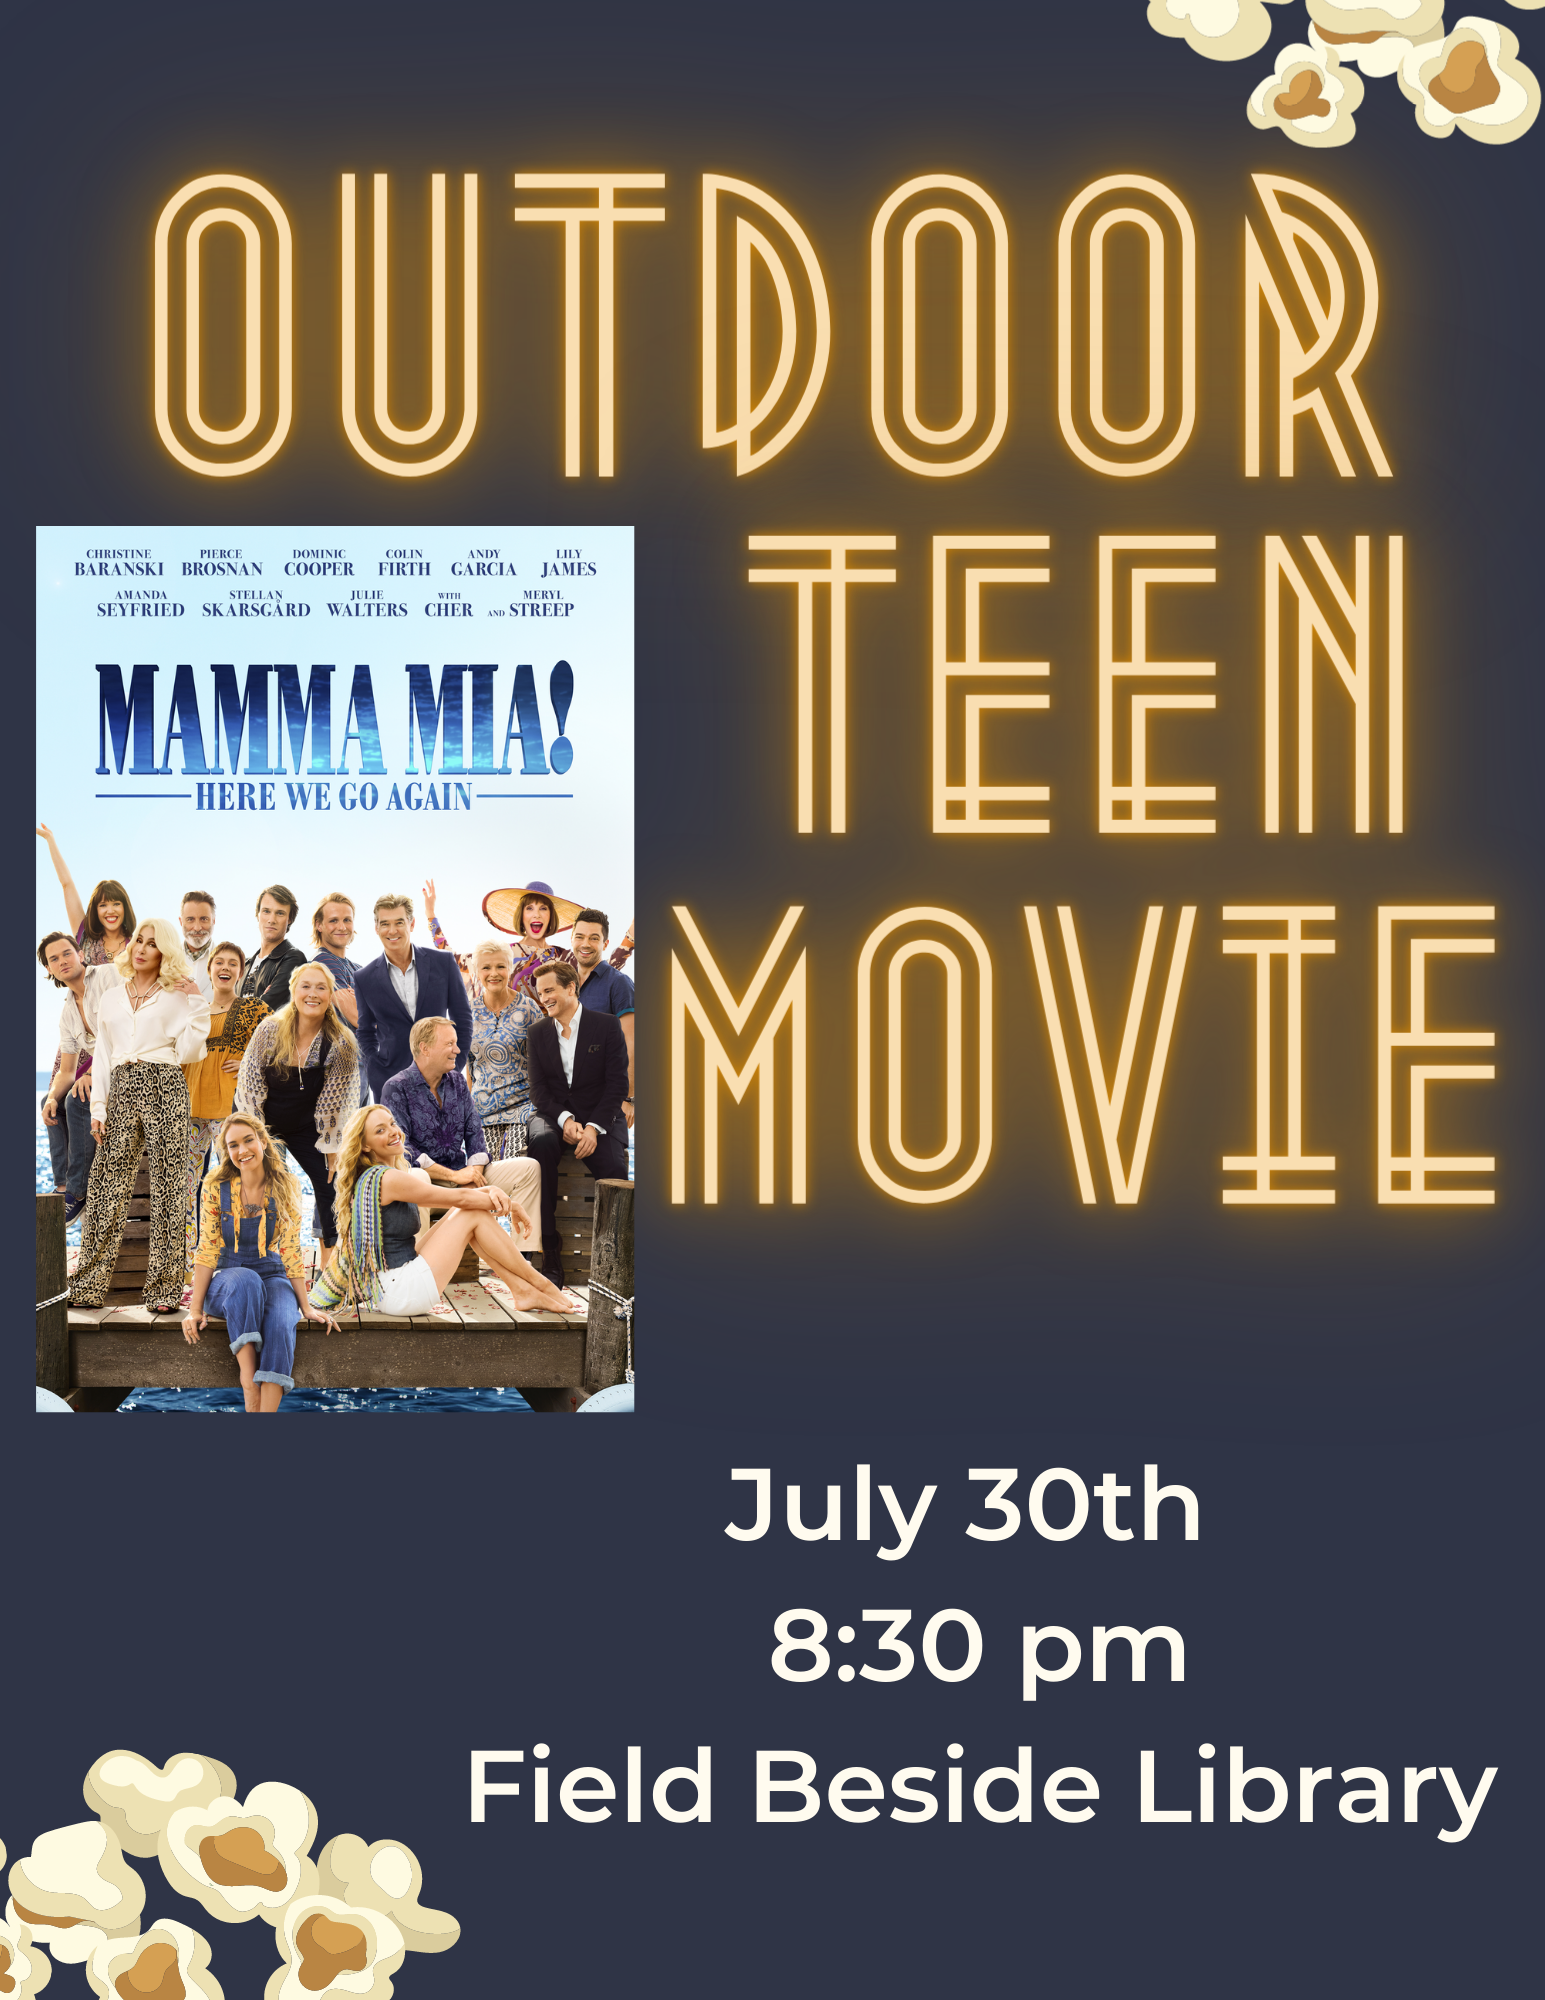 Outdoor Teen Movie poster with image of Mamma Mia 2 poster. July 30th, 8:30pm, Field Beside Library